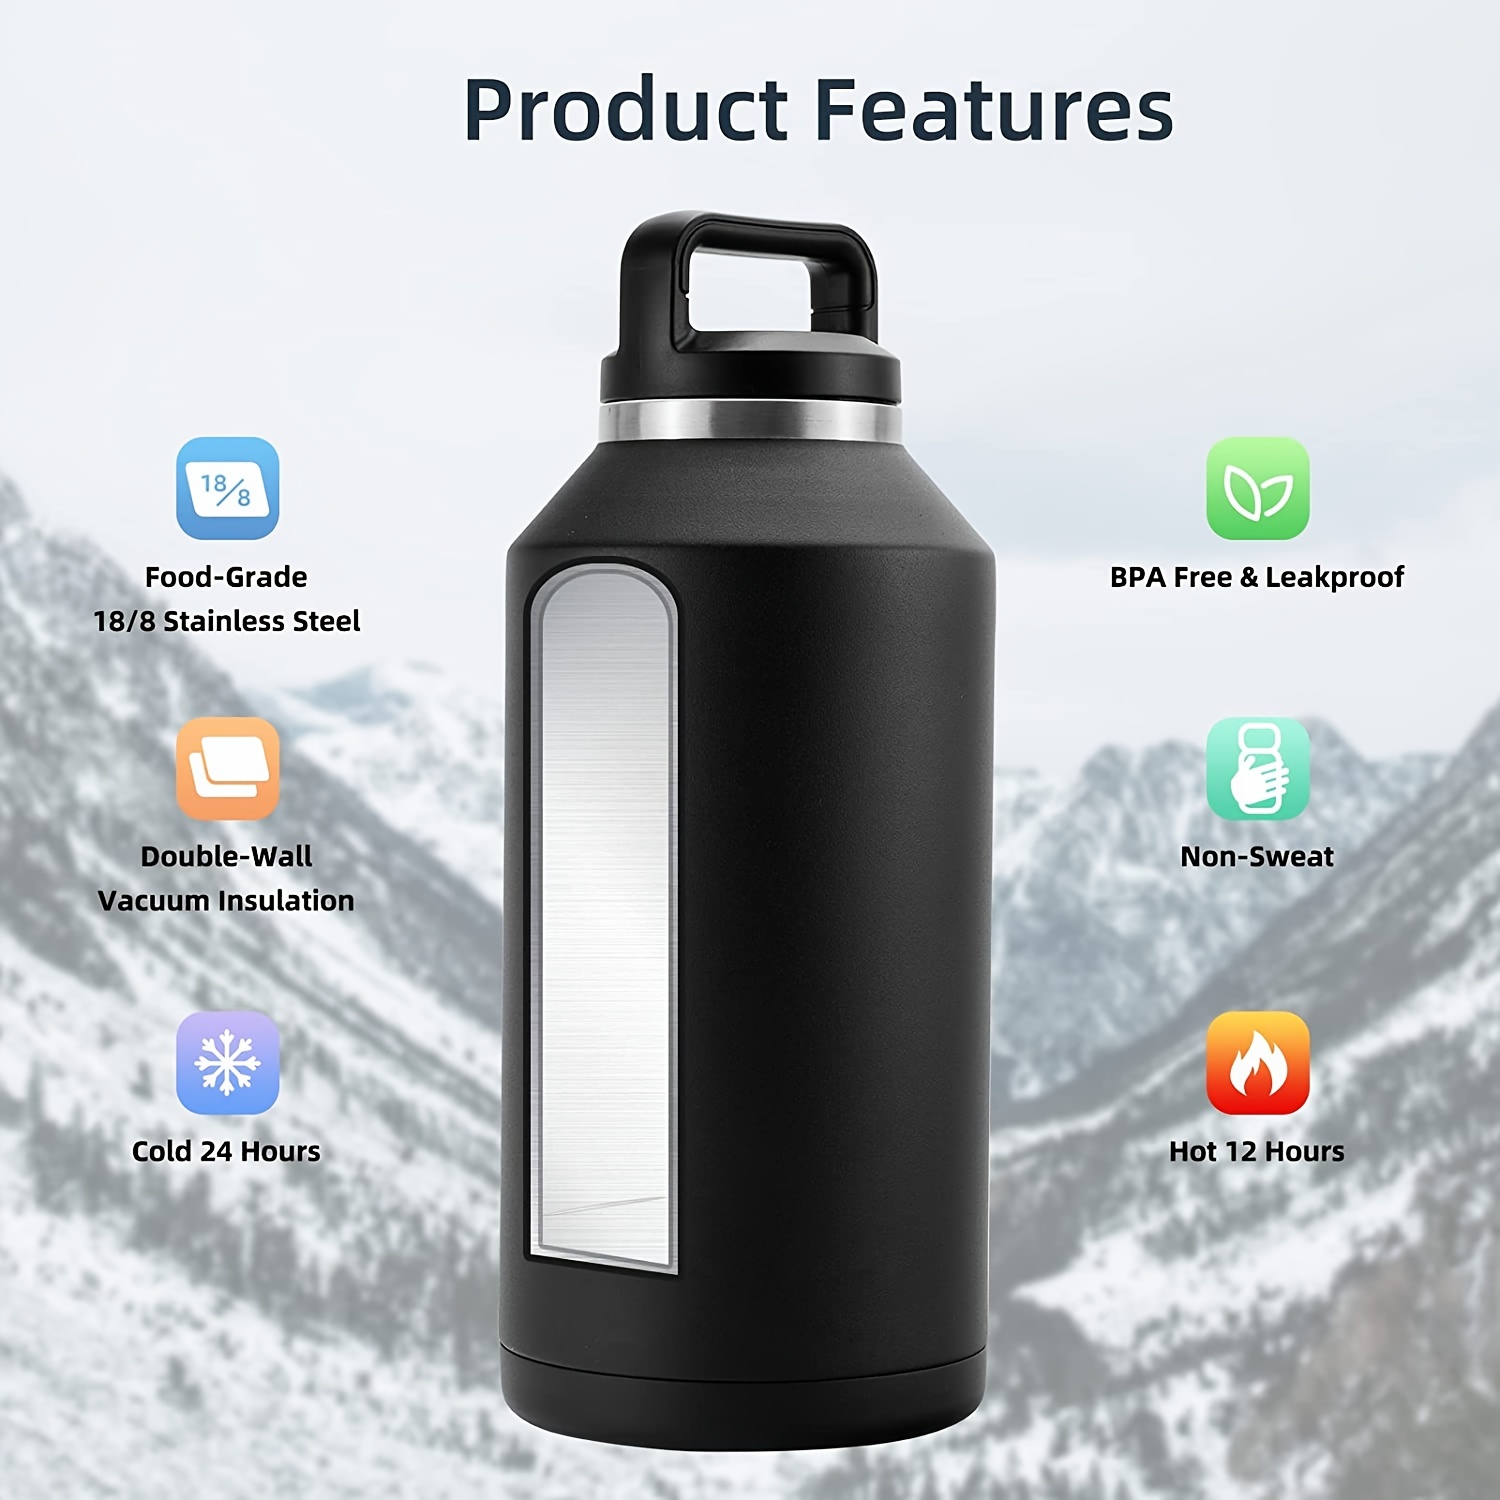 Large Capacity Insulated Sport Thermos Insulated Gallon Water